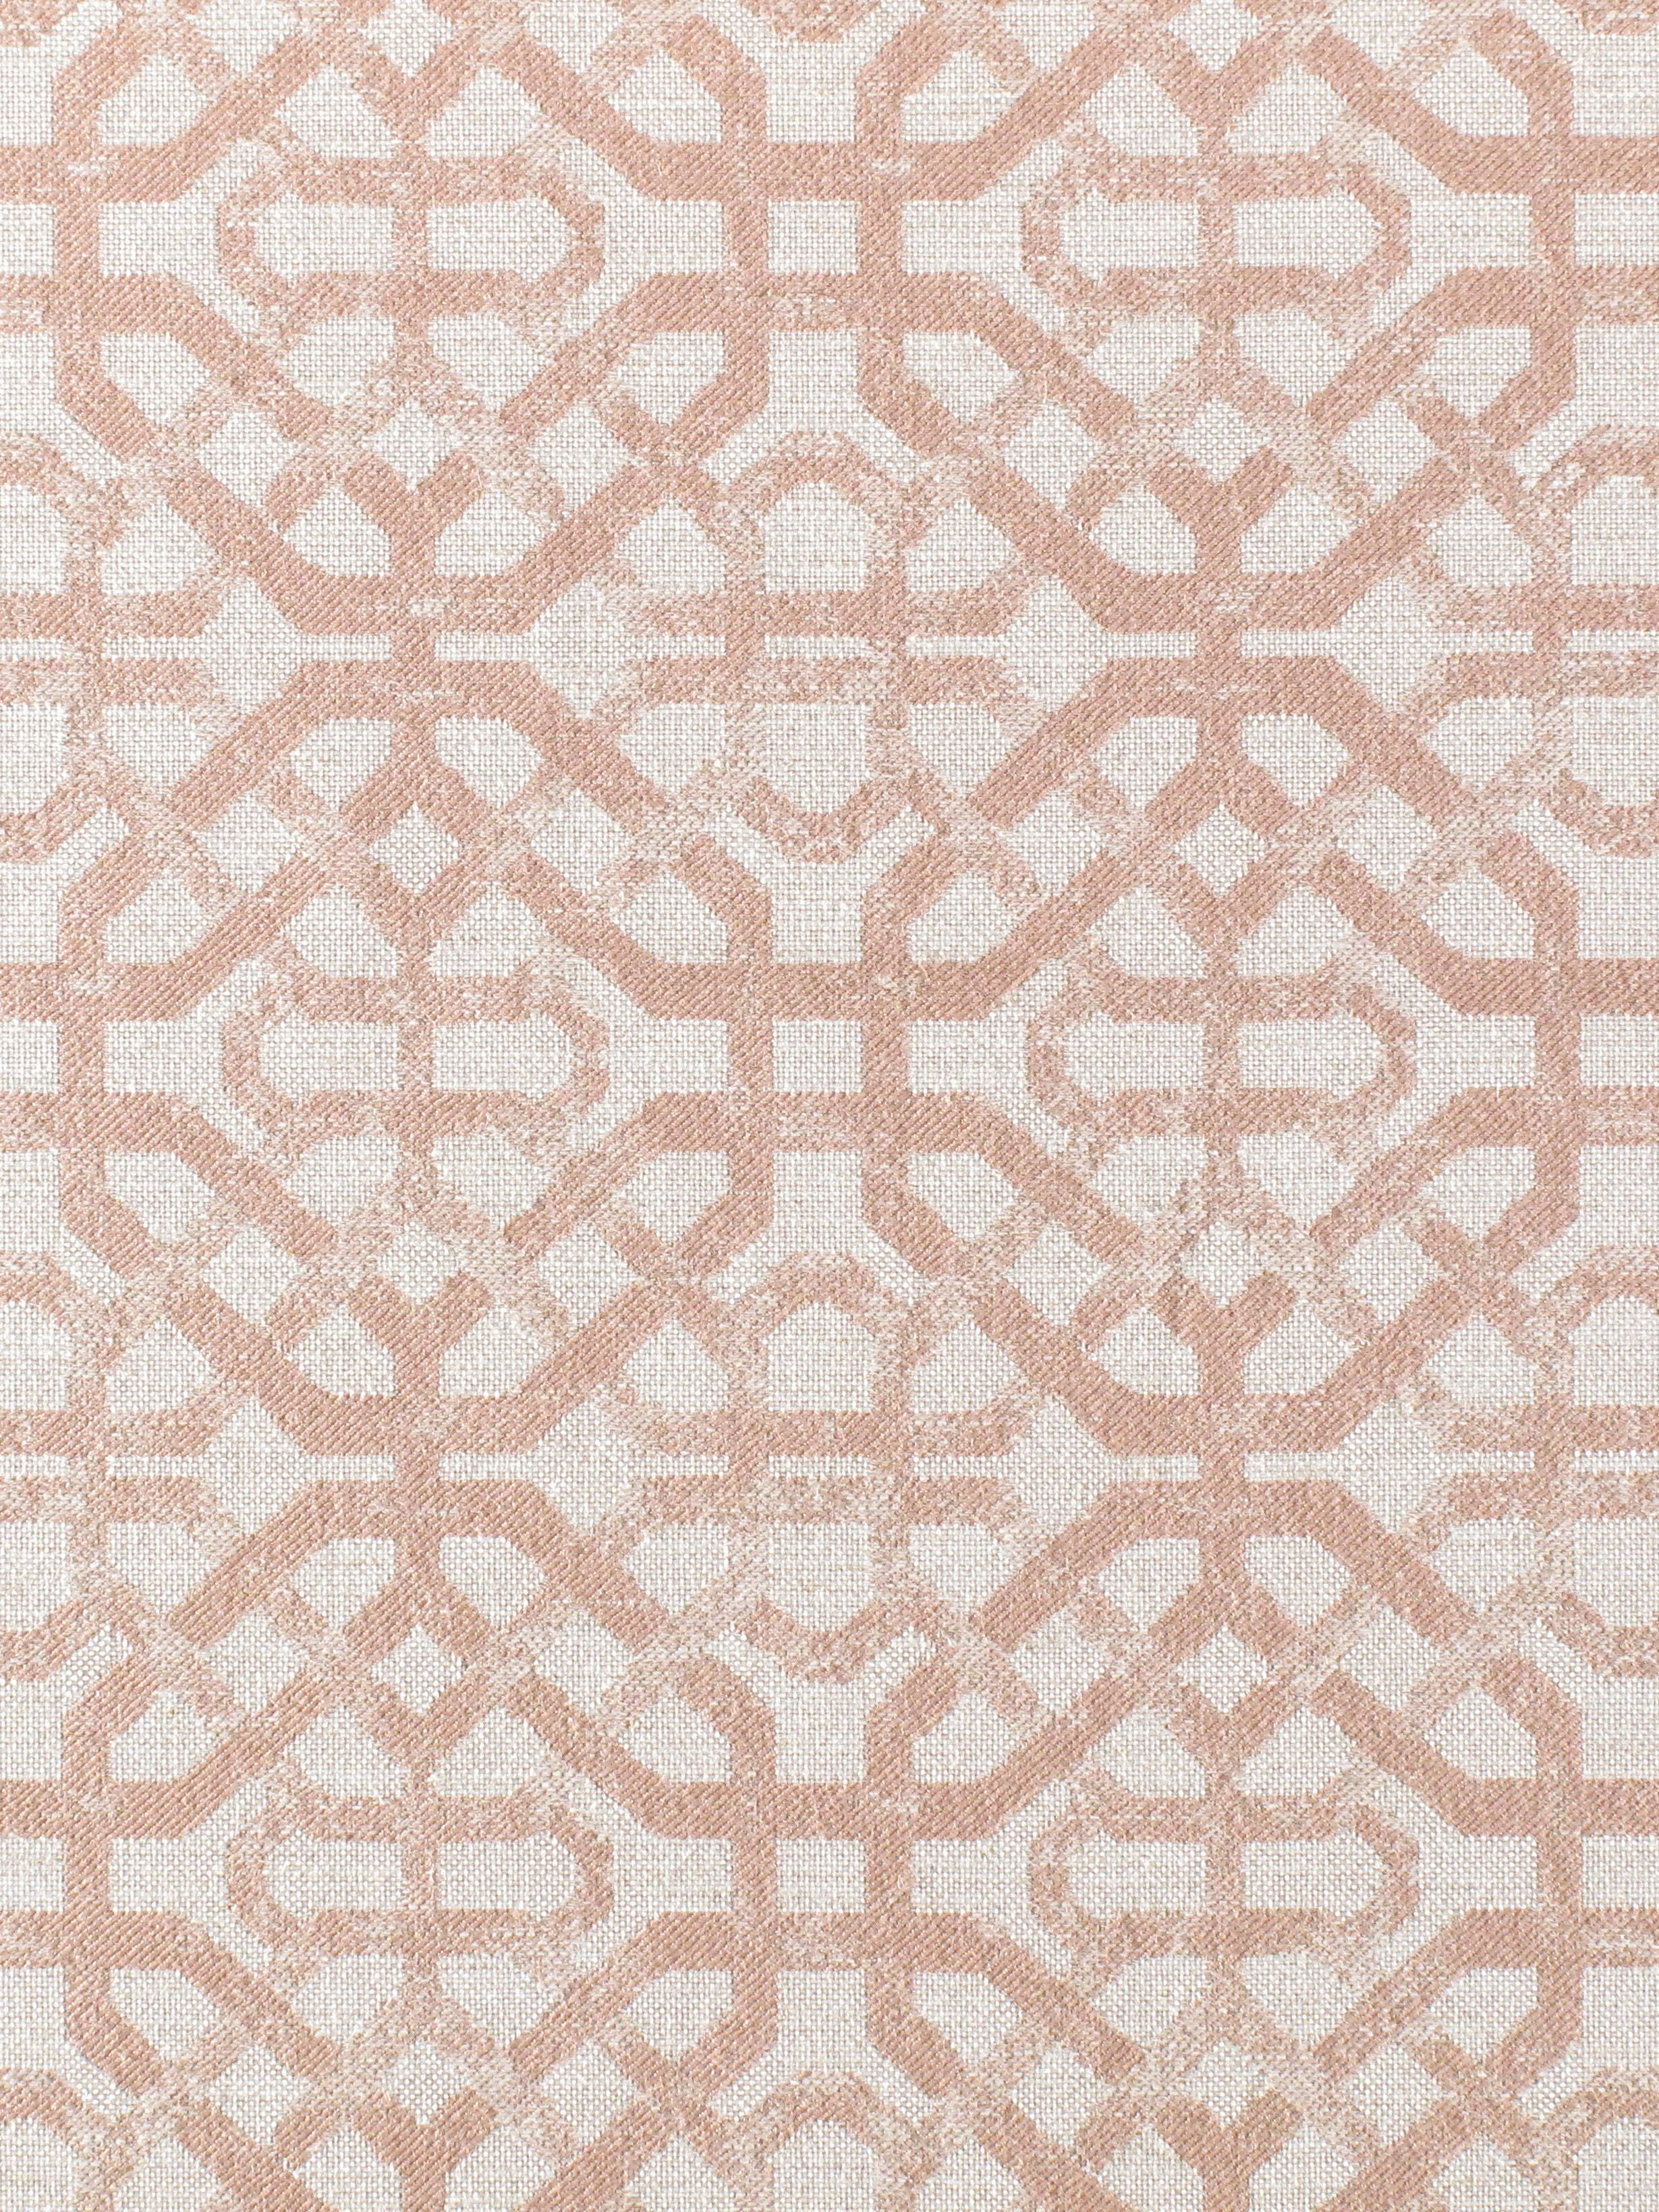 Porta Fregio fabric in shell pink color - pattern number N3 00063133 - by Scalamandre in the Old World Weavers collection